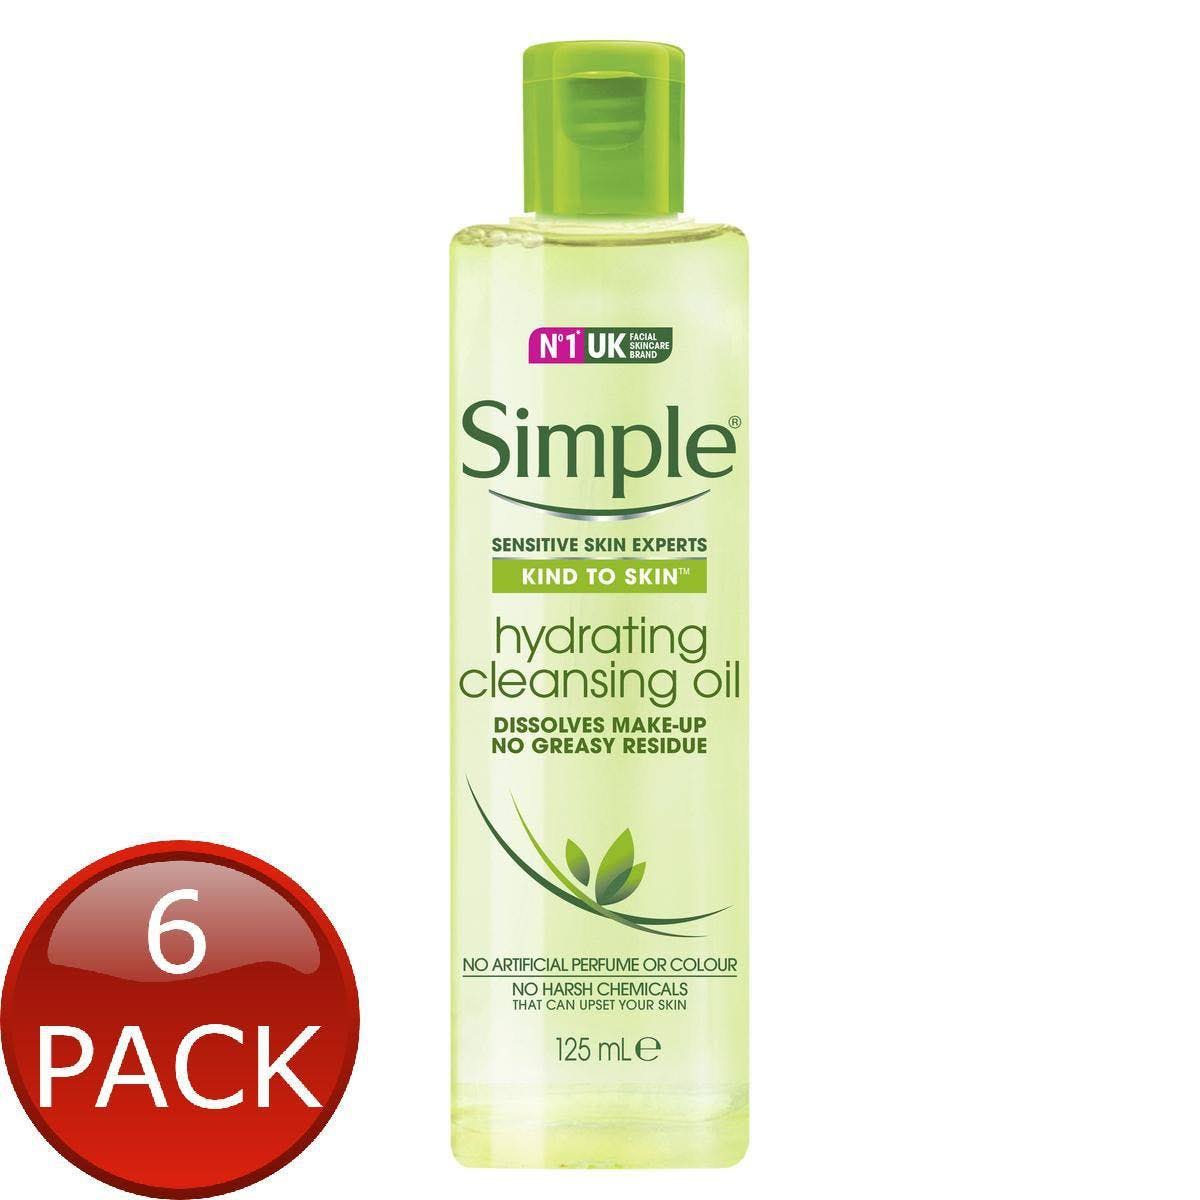 Simple Kind to Skin Hydrating Cleansing Oil - 125ml